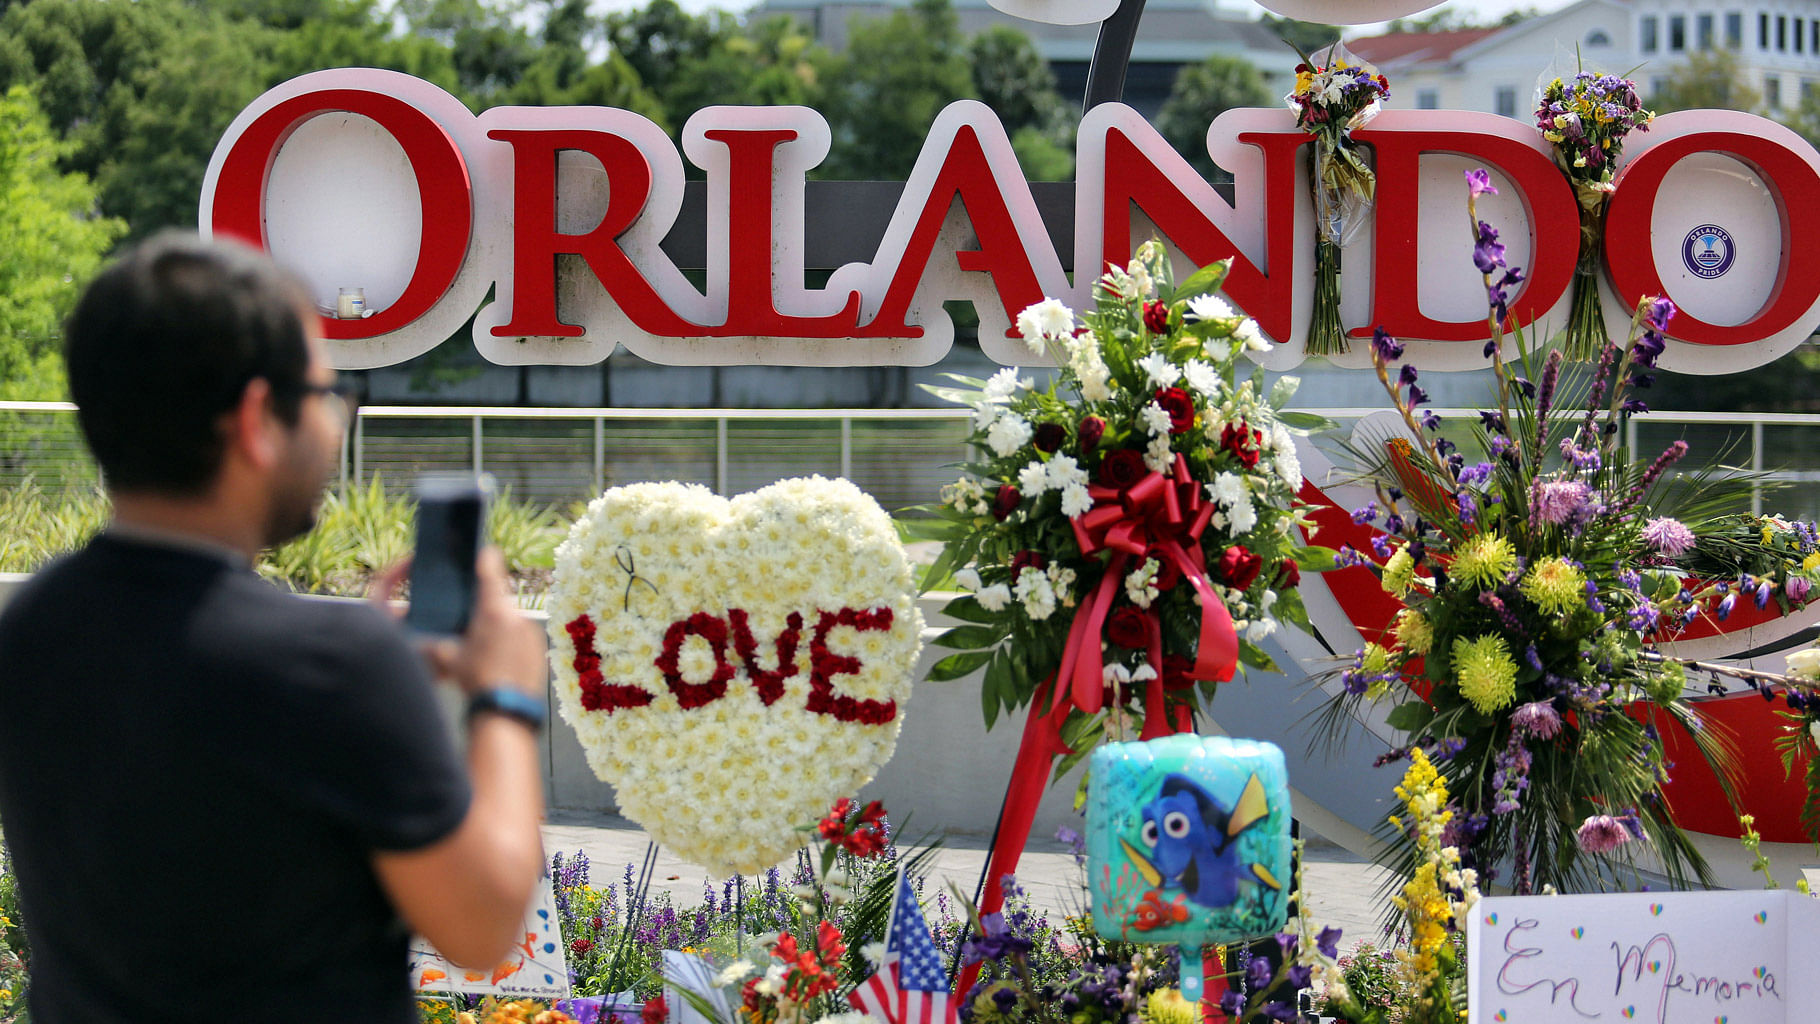 

A man takes a photo with his iPhone as visitors continue to pay their respects at a makeshift memorial at Orlando Regional Medical Center, a few blocks from the Pulse nightclub, Florida, June 14, 2016. (Photo: AP)